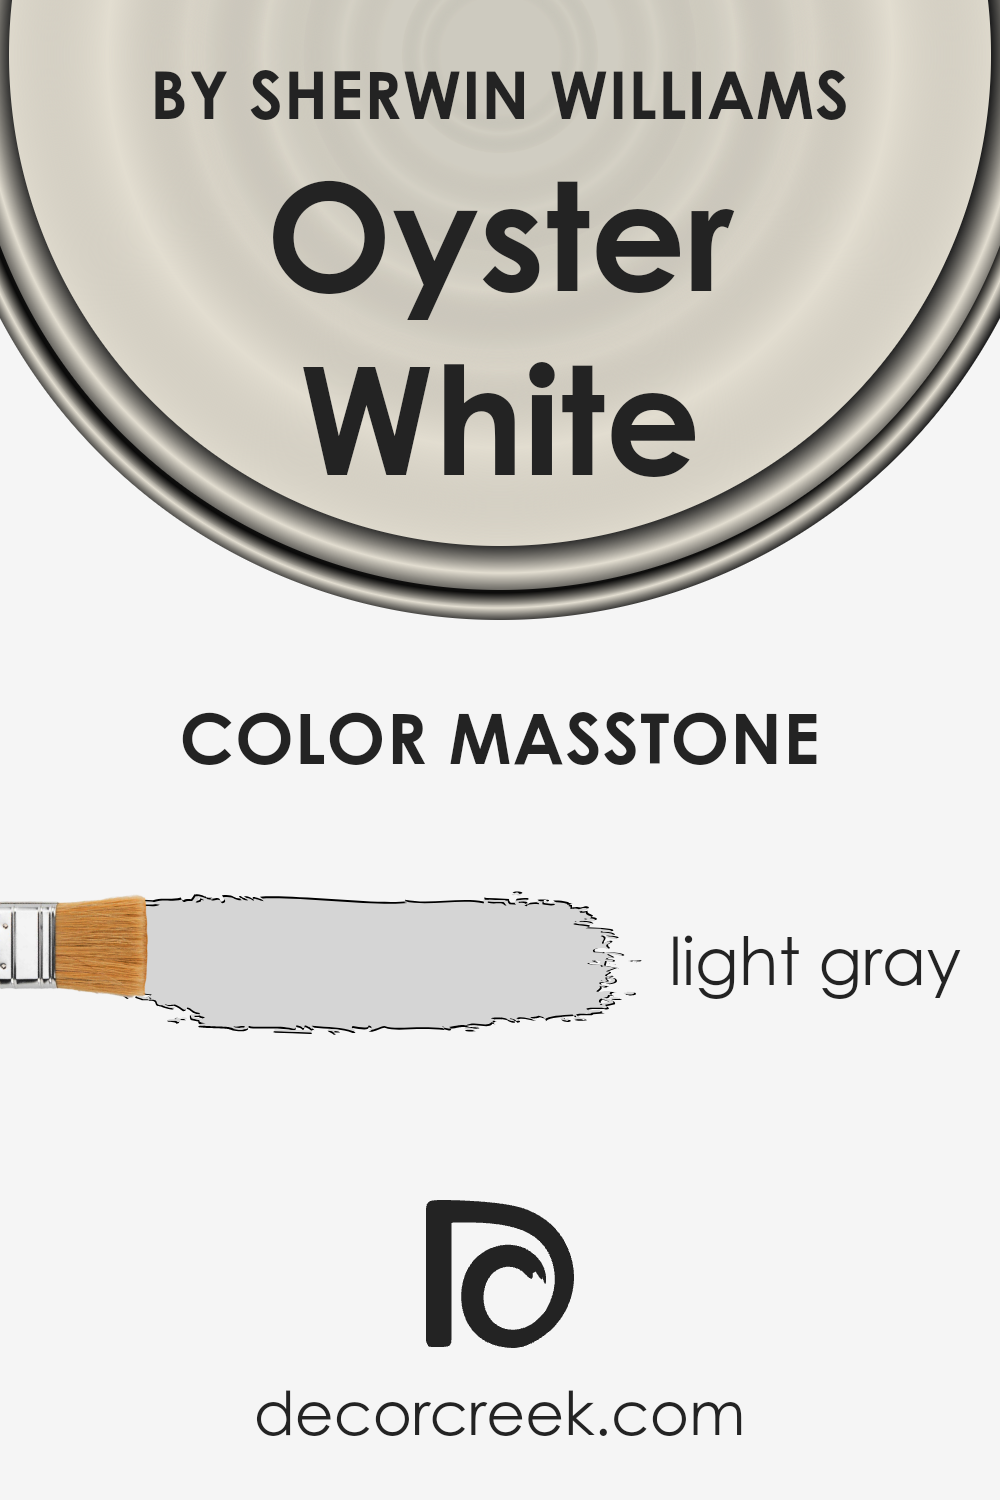 what_is_the_masstone_of_oyster_white_sw_7637